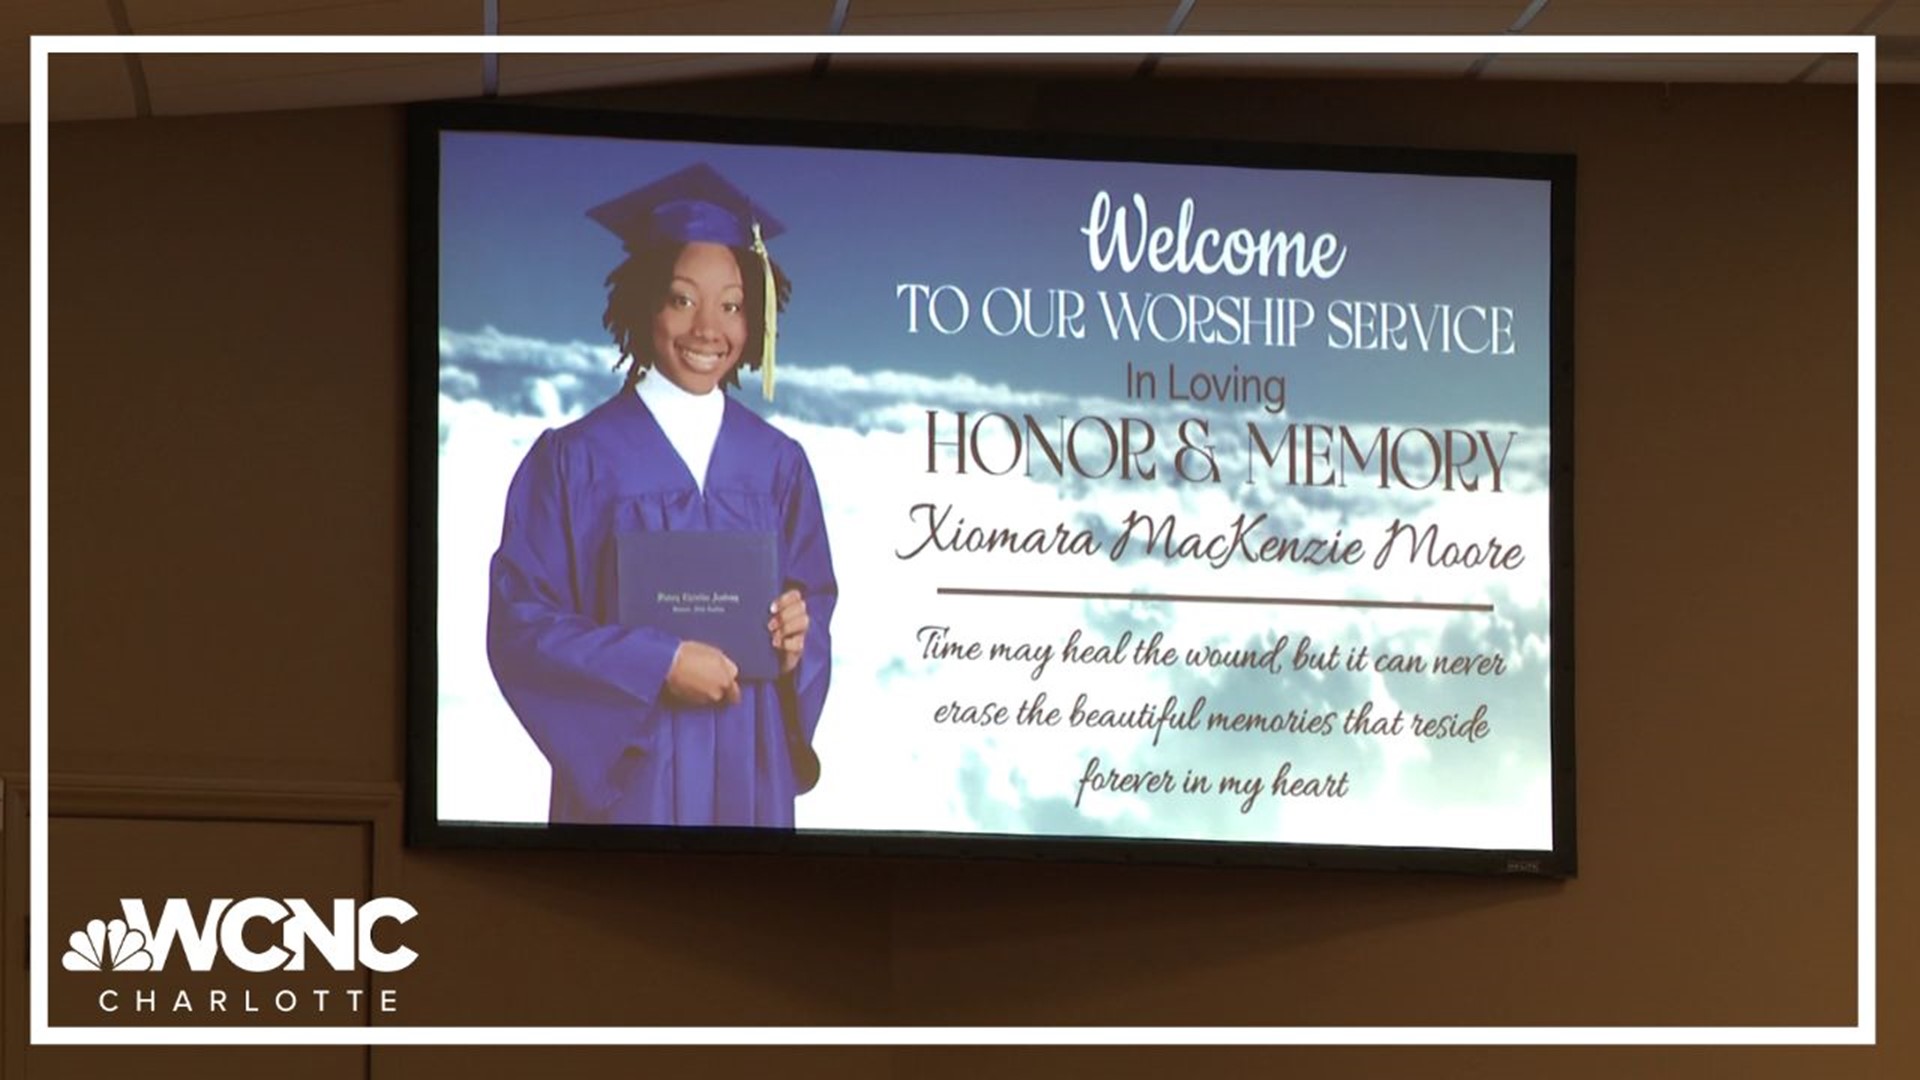 As officials work to find the person responsible, Xiomara Moore's family and friends celebrated her at home in Gastonia on Wednesday.